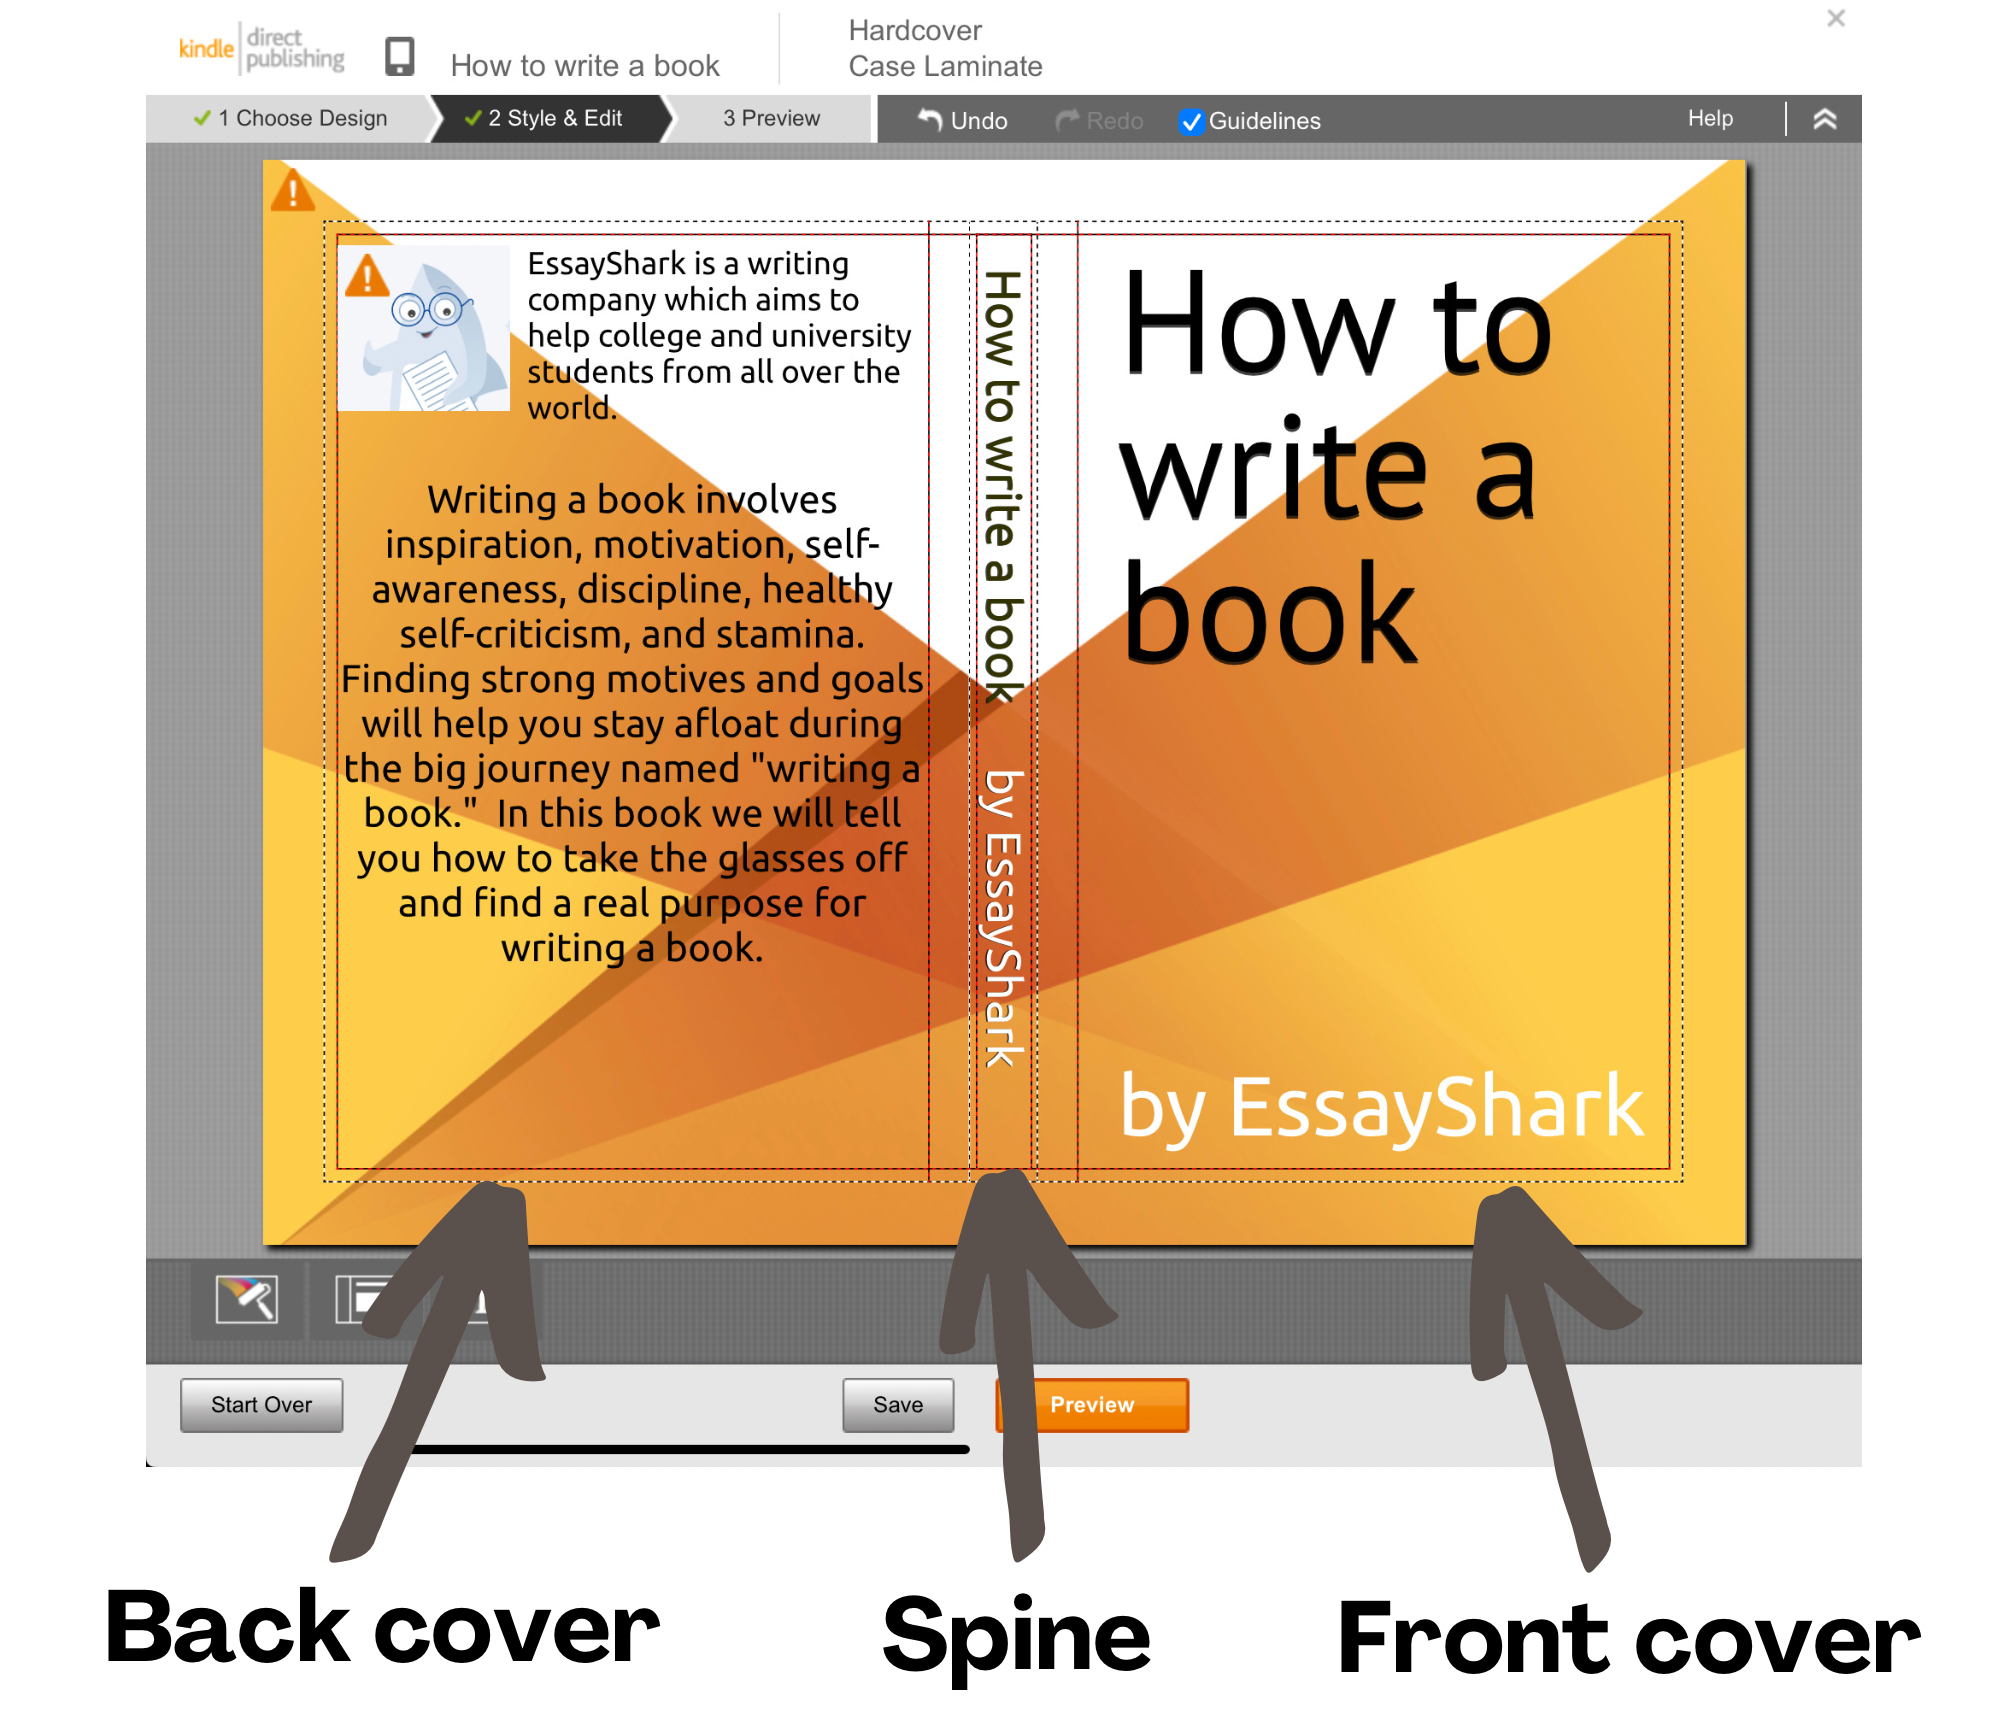 How to make a book cover on Amazon